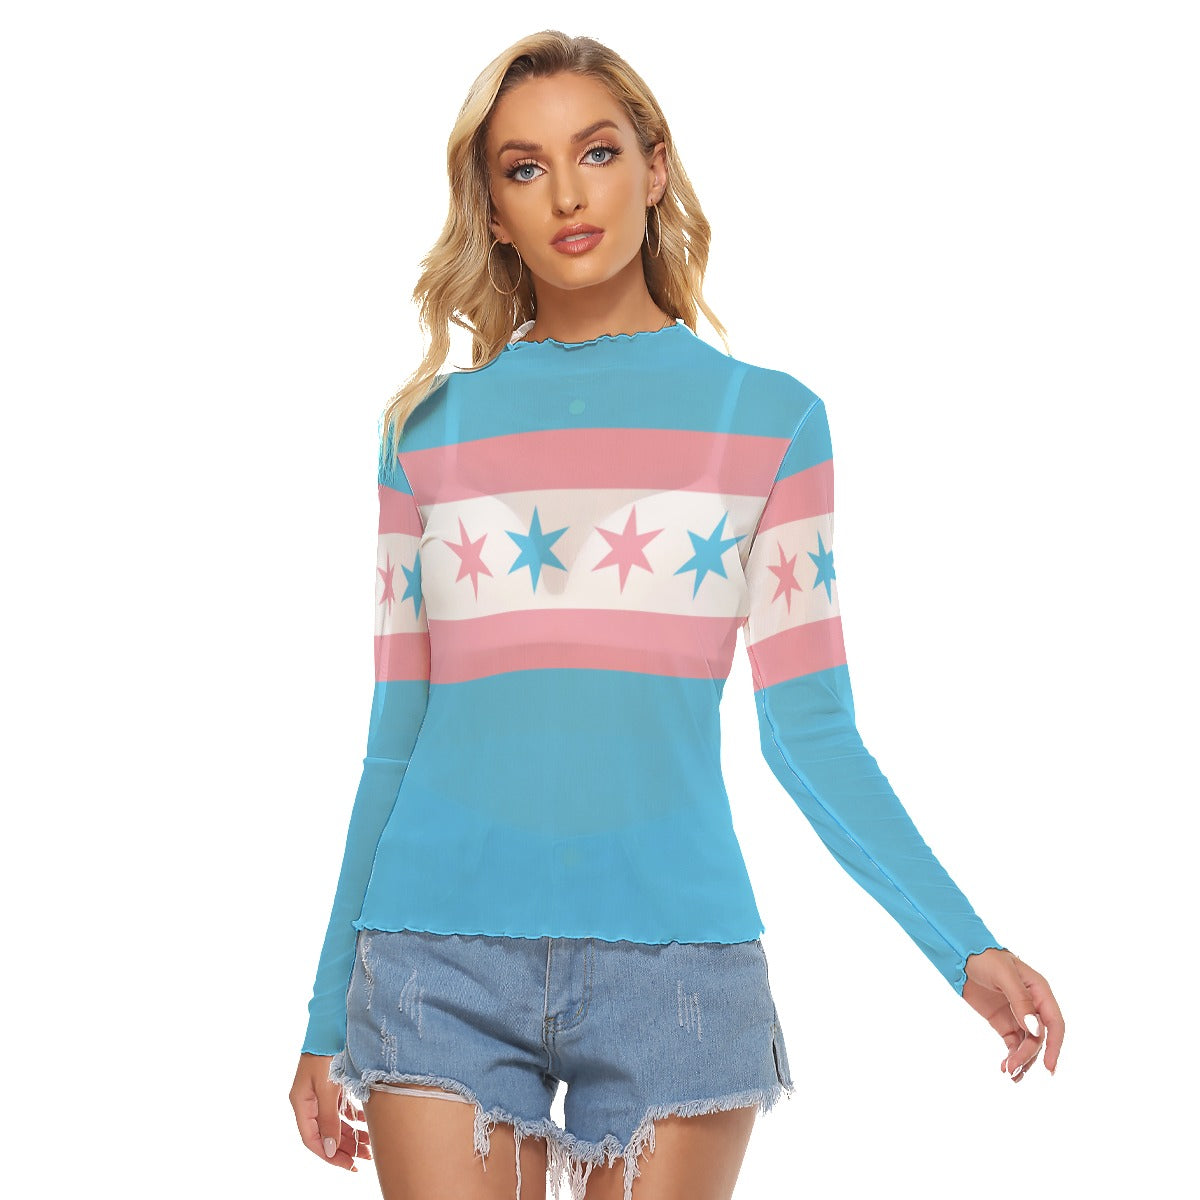 Teen Blue Pink White All-Over Pride See-Through Long-Sleeved T-Shirt